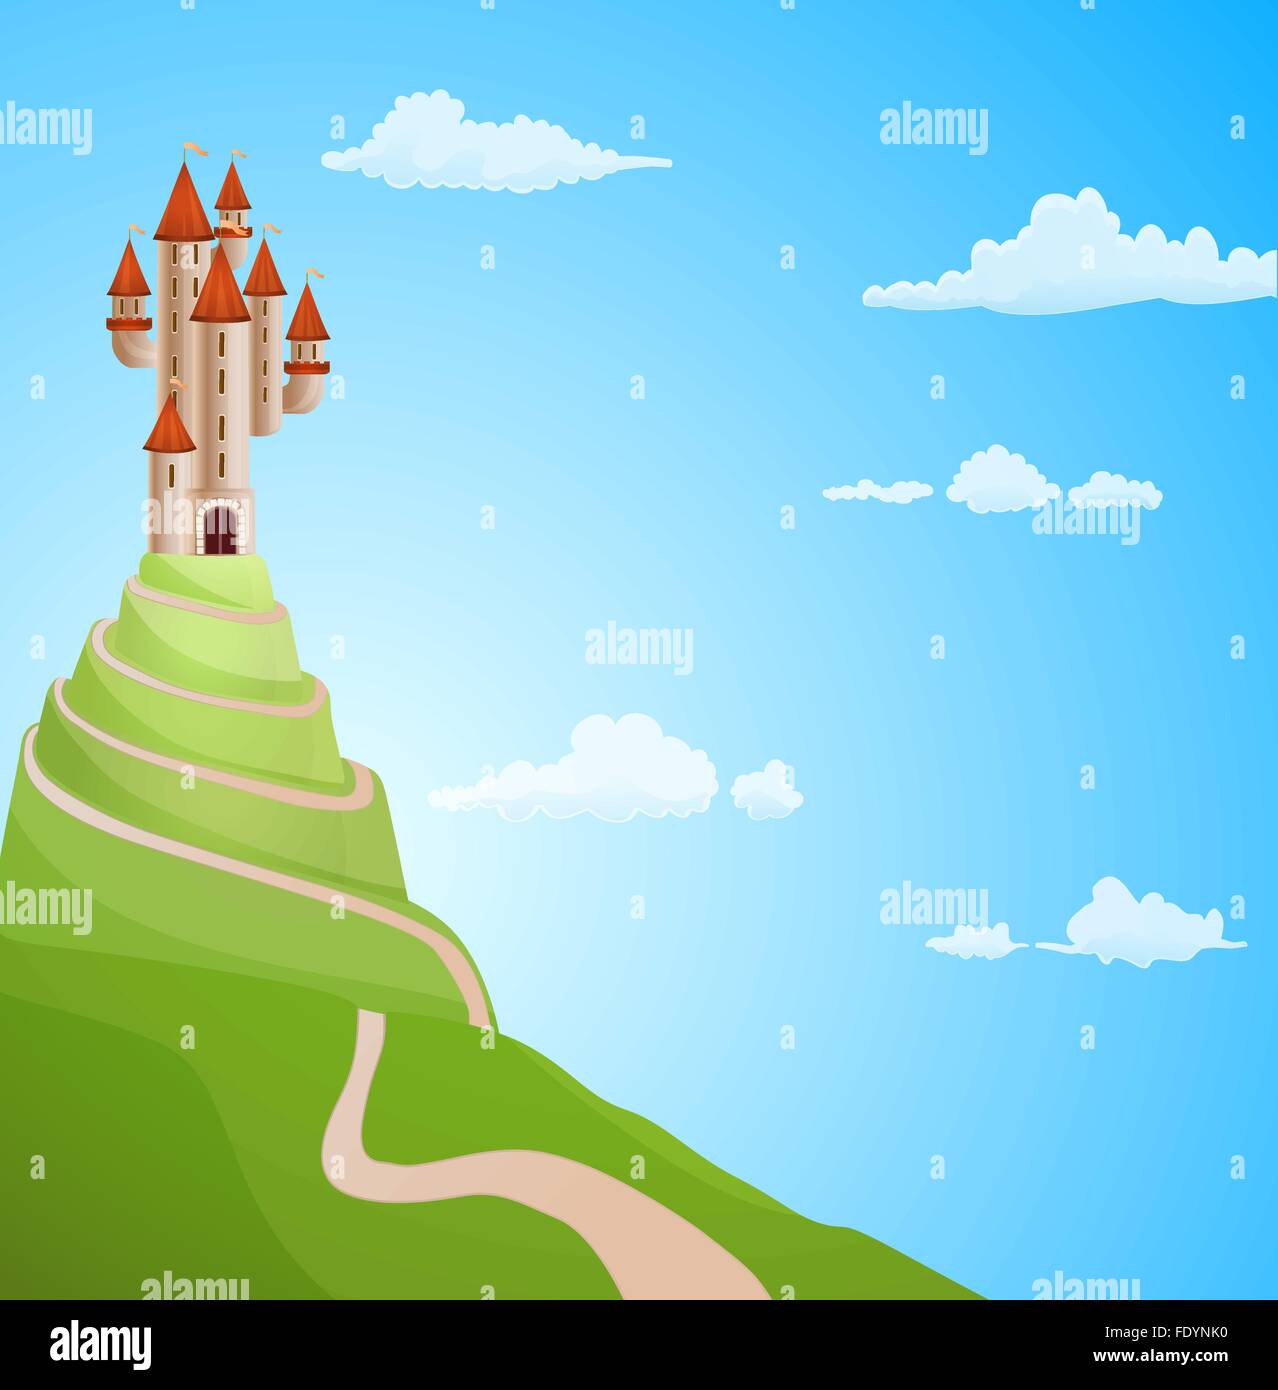 castle on the hill with road background illustration. vector Stock Vector